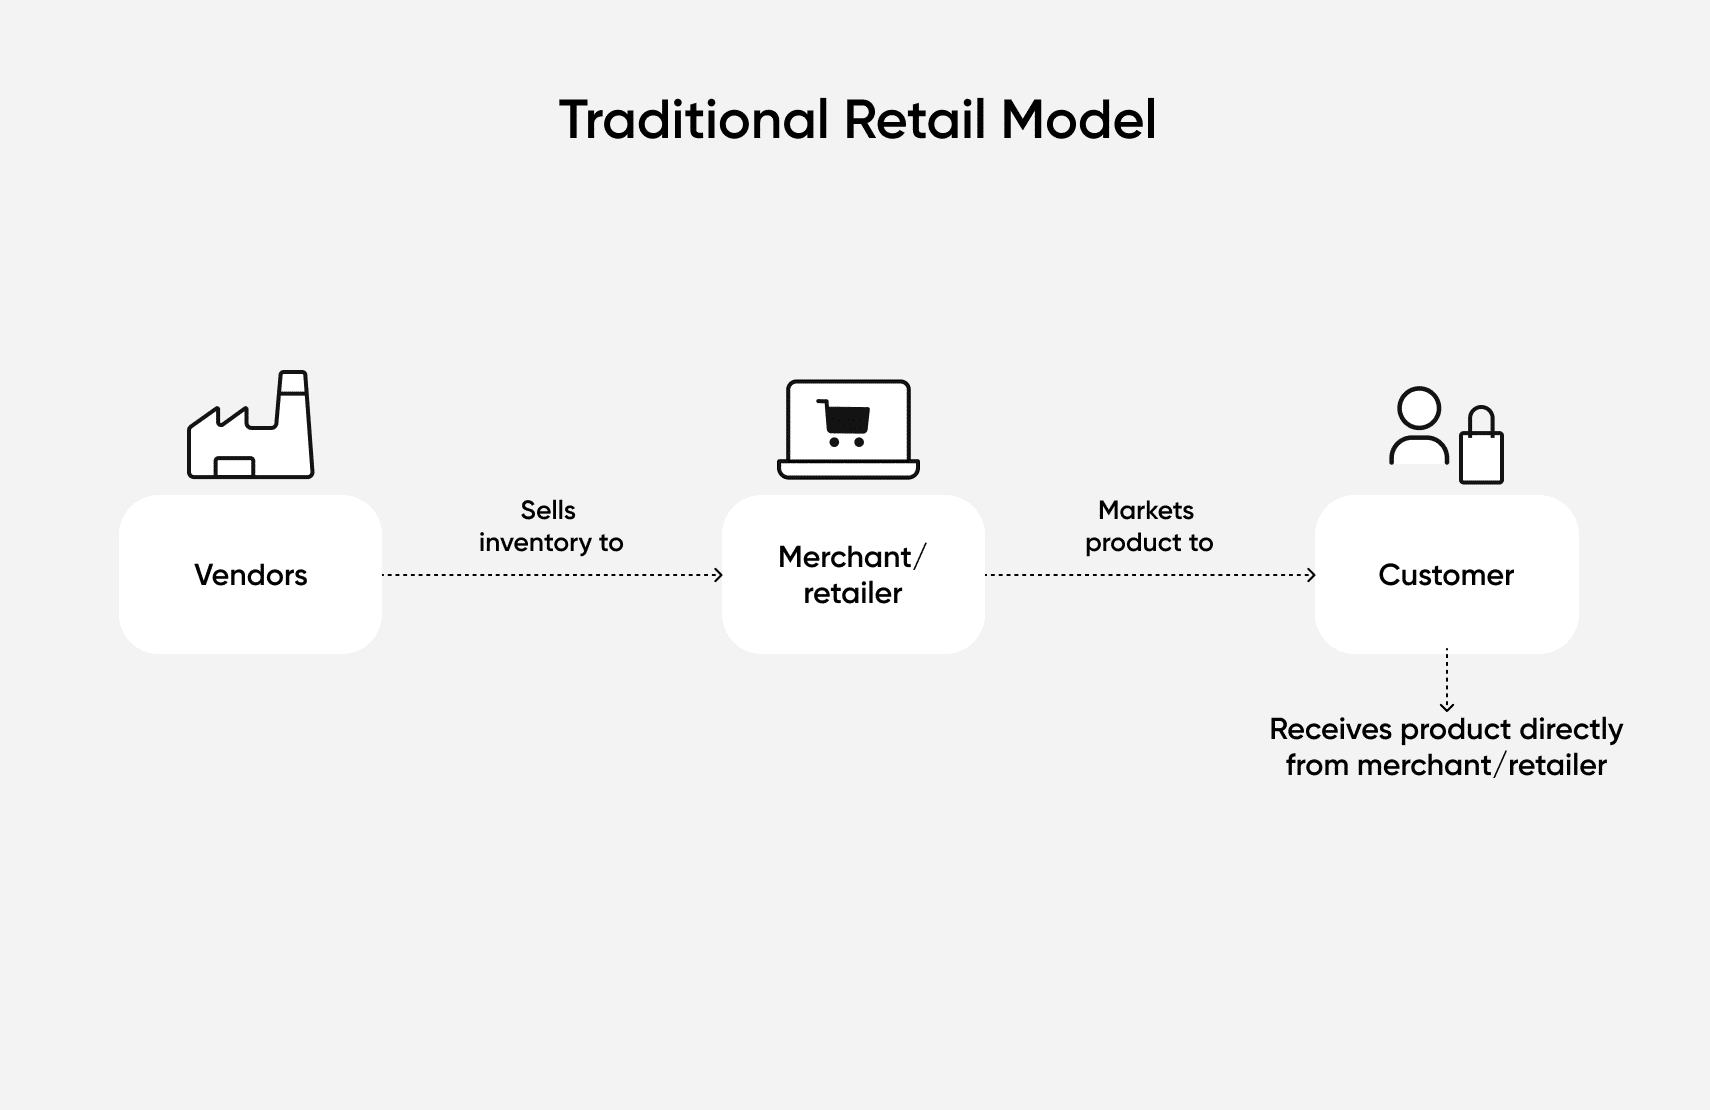 The fulfillment method of a traditional retail model differs from that of dropshipping and third-party marketplaces 